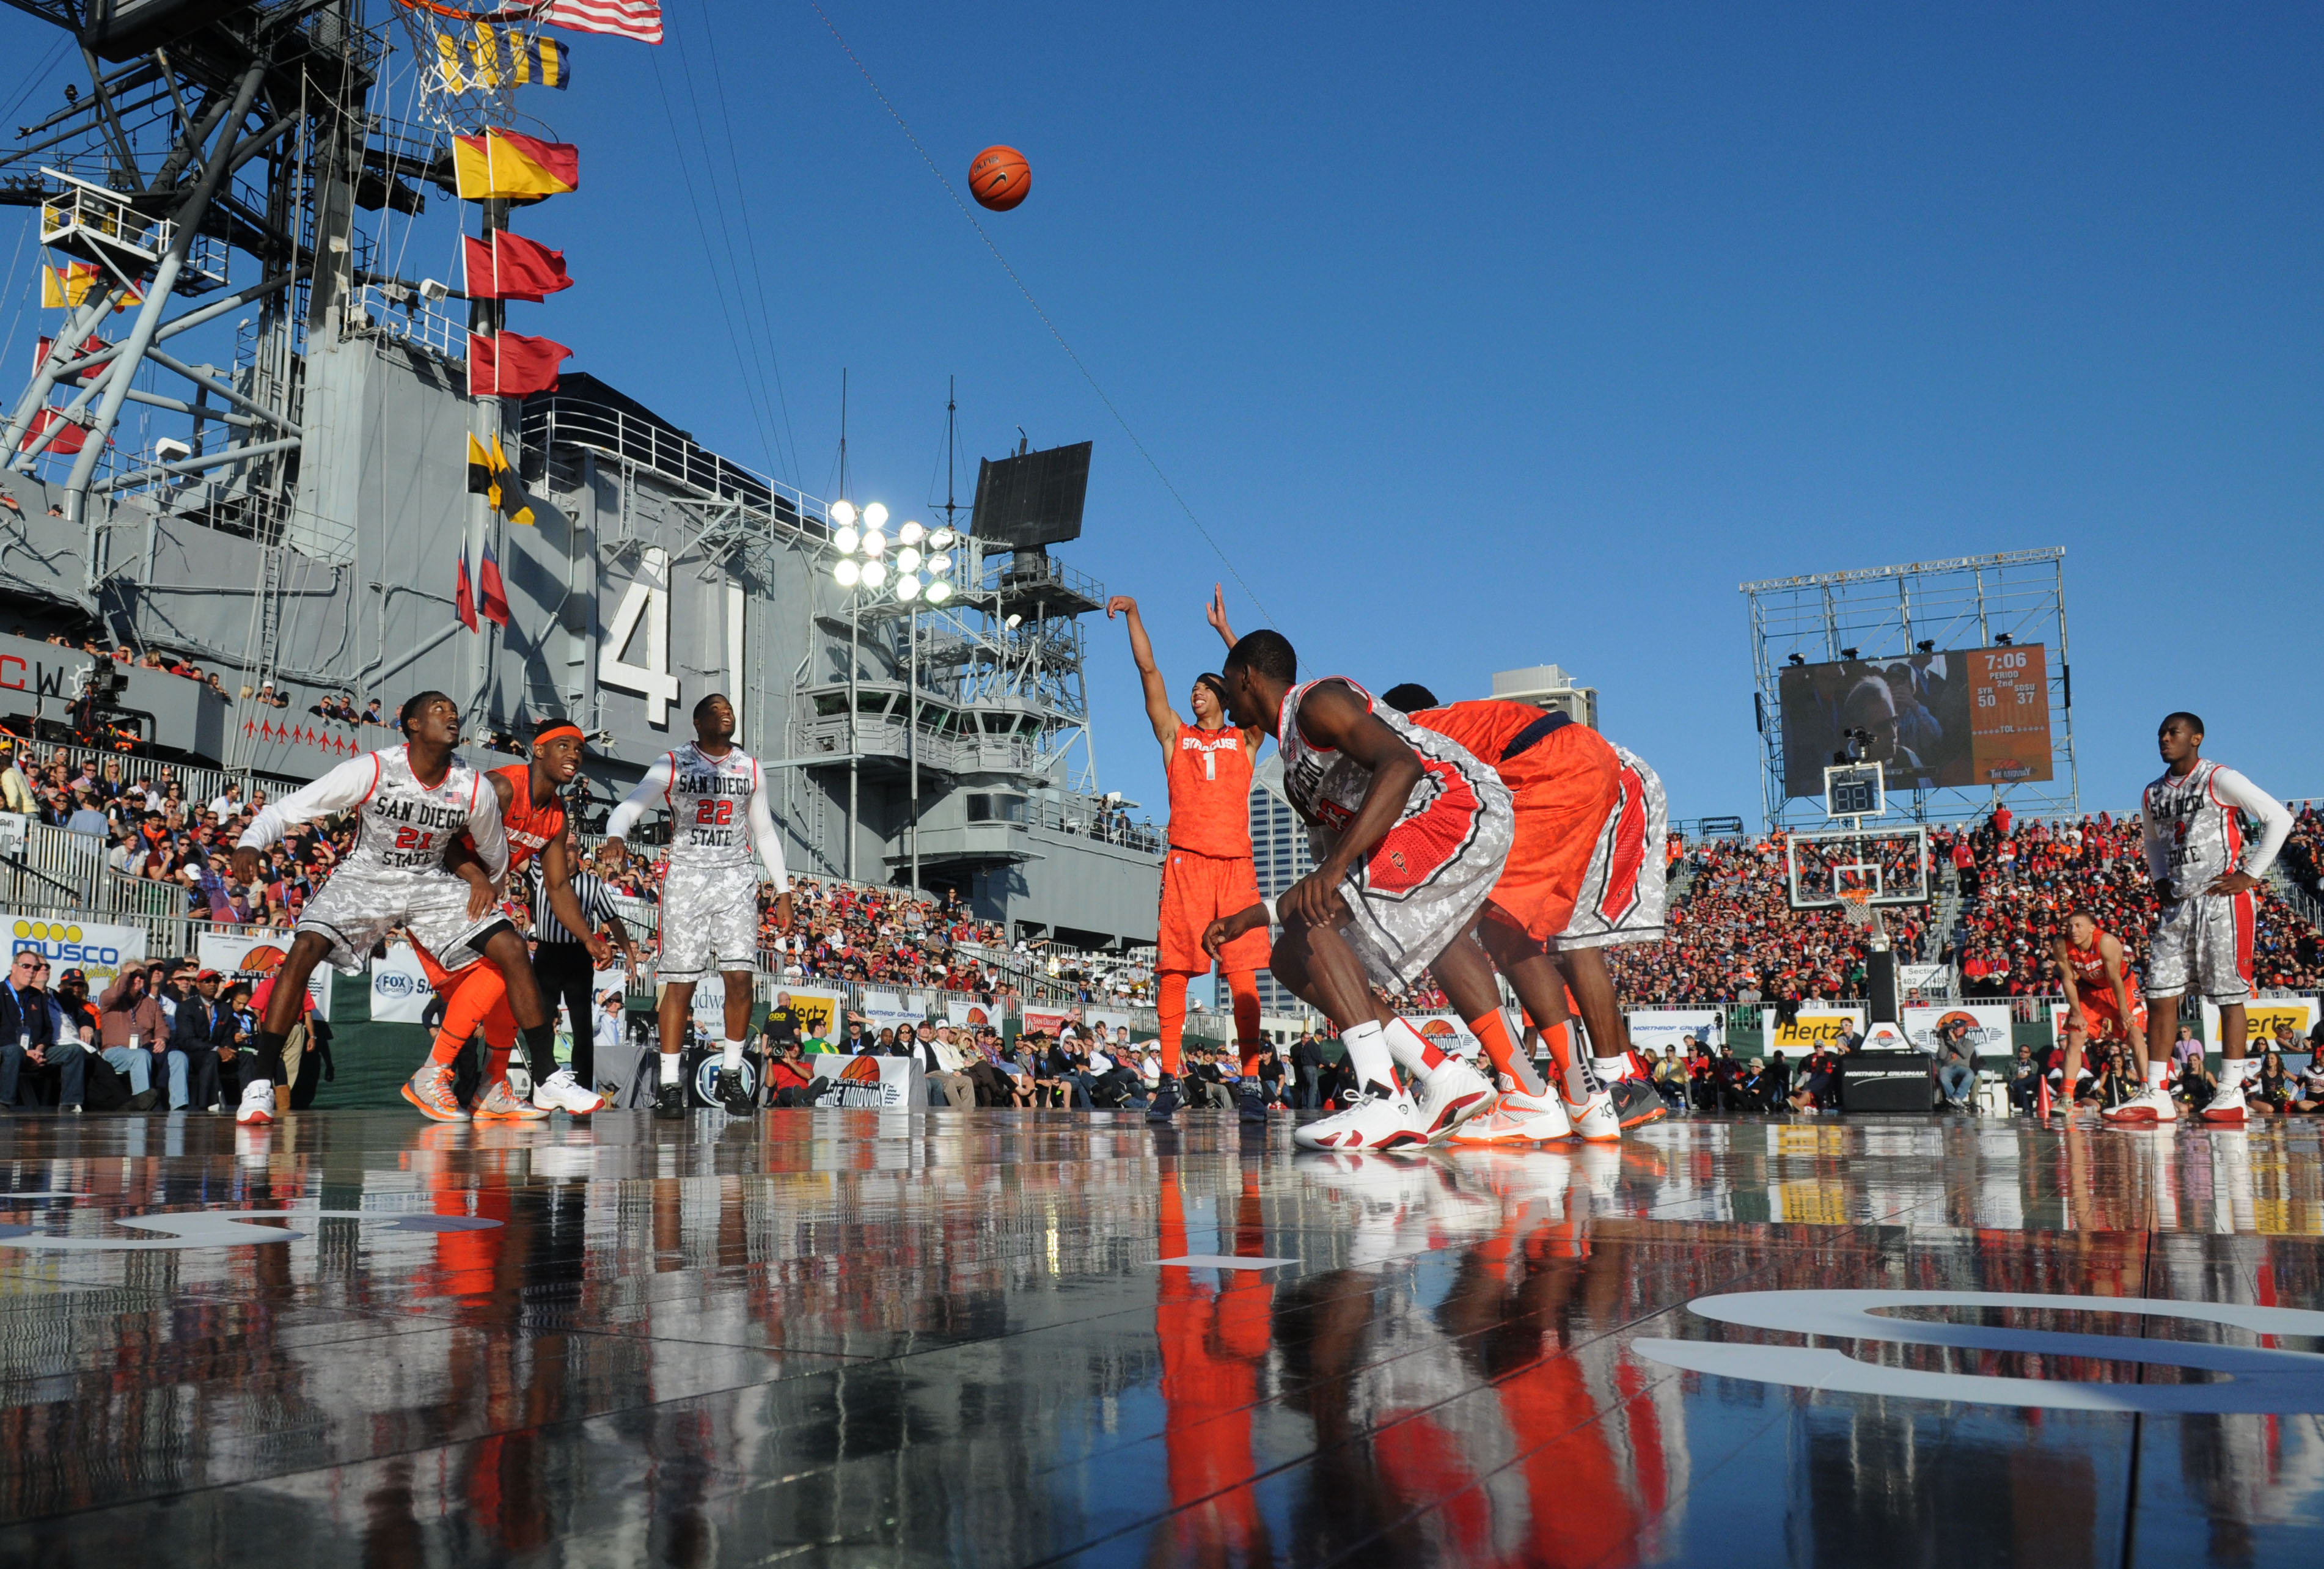 When Syracuse and San Diego State played on aircraft carrier Wind-blown shots, errant free throws and sunburn